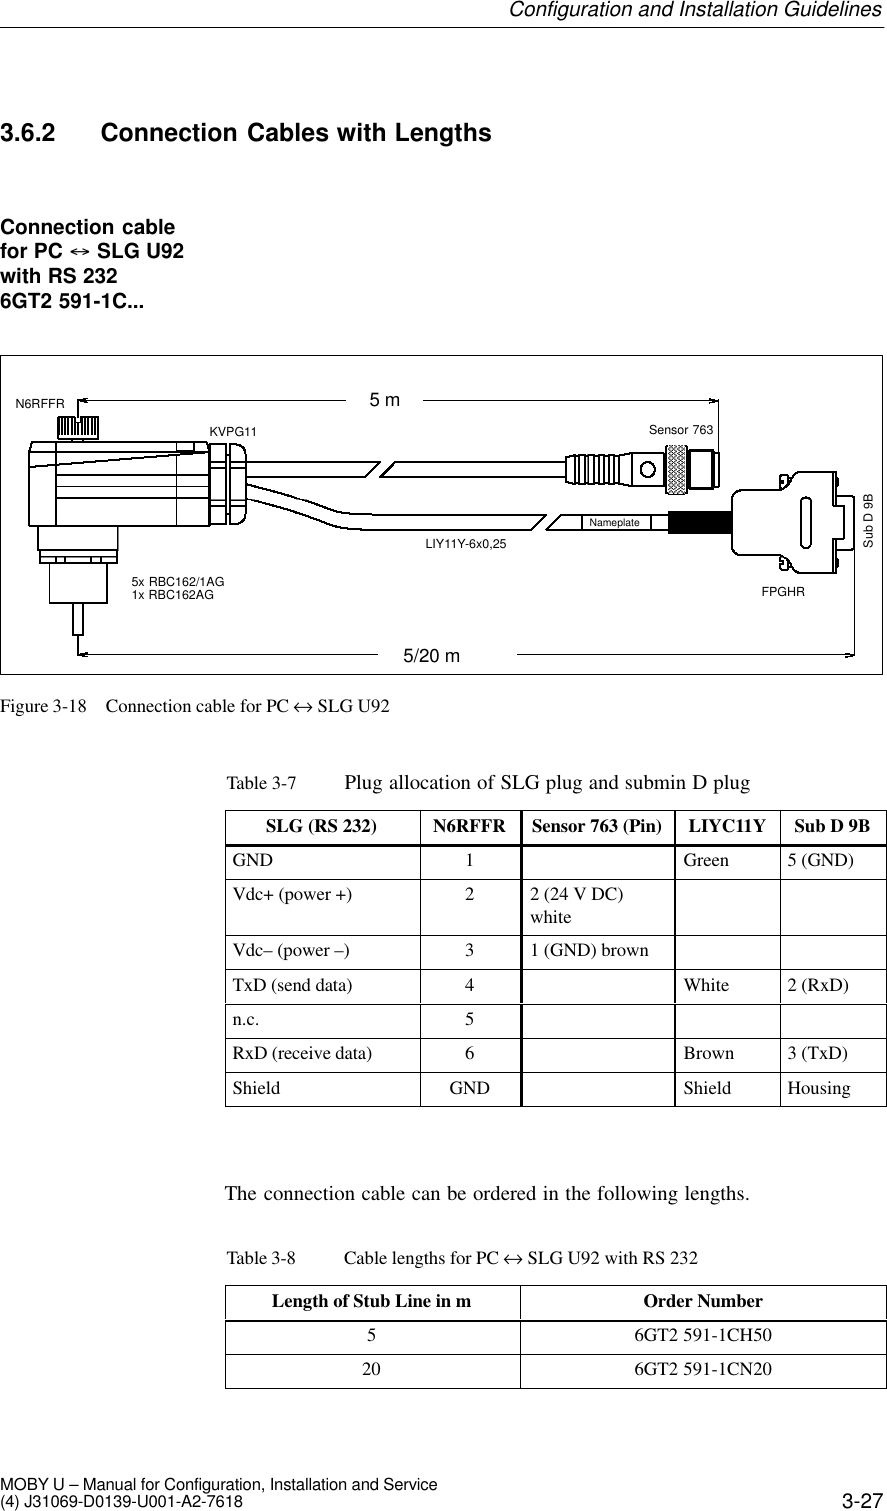 3-27MOBY U – Manual for Configuration, Installation and Service(4) J31069-D0139-U001-A2-76183.6.2 Connection Cables with Lengths5 m5/20 mN6RFFRKVPG11 Sensor 763FPGHRLIY11Y-6x0,255x RBC162/1AGNameplateSub D 9B1x RBC162AGFigure 3-18 Connection cable for PC ↔ SLG U92Table 3-7 Plug allocation of SLG plug and submin D plugSLG (RS 232) N6RFFR Sensor 763 (Pin) LIYC11Y Sub D 9BGND 1 Green 5 (GND)Vdc+ (power +) 22 (24 V DC)whiteVdc– (power –) 31 (GND) brownTxD (send data) 4 White 2 (RxD)n.c. 5RxD (receive data) 6 Brown 3 (TxD)Shield GND Shield HousingThe connection cable can be ordered in the following lengths.Table 3-8 Cable lengths for PC ↔ SLG U92 with RS 232Length of Stub Line in m Order Number56GT2 591-1CH5020 6GT2 591-1CN20Connection cablefor PC  SLG U92 with RS 232 6GT2 591-1C...Configuration and Installation Guidelines